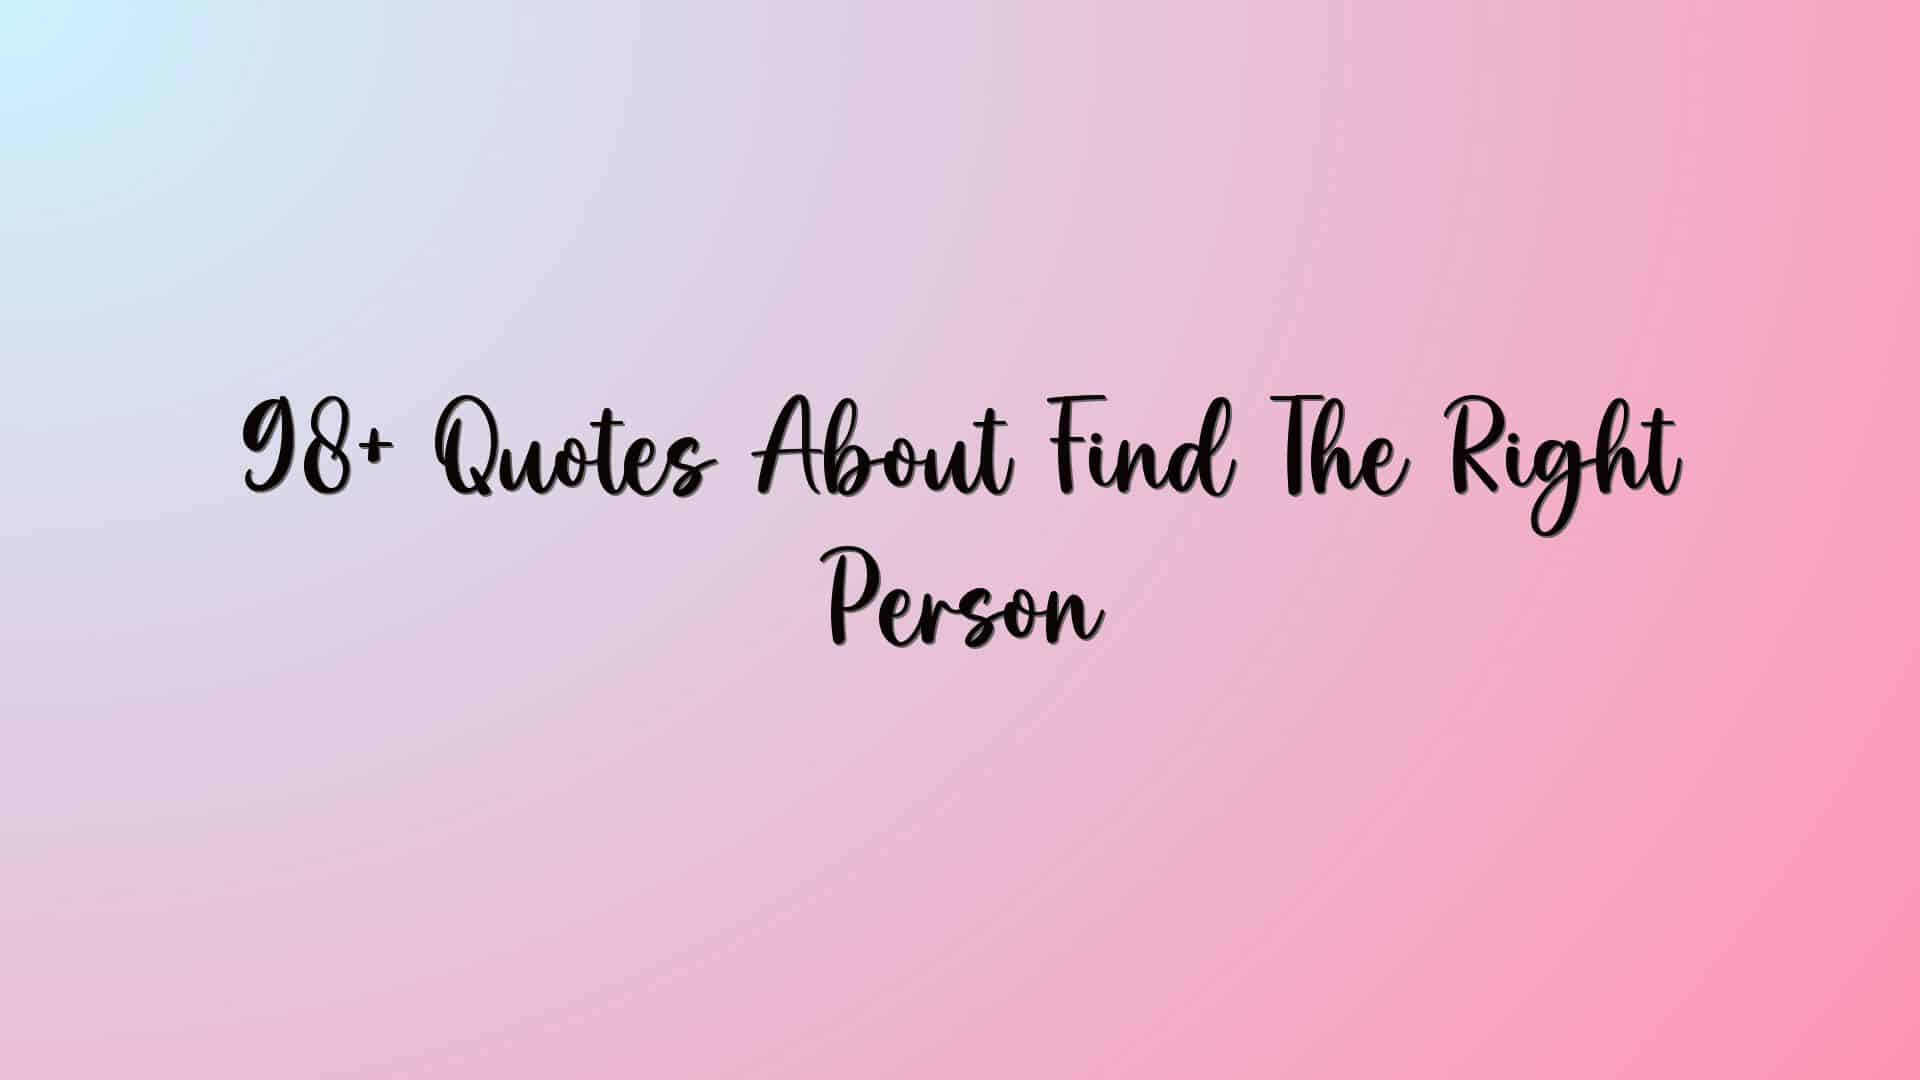 98+ Quotes About Find The Right Person